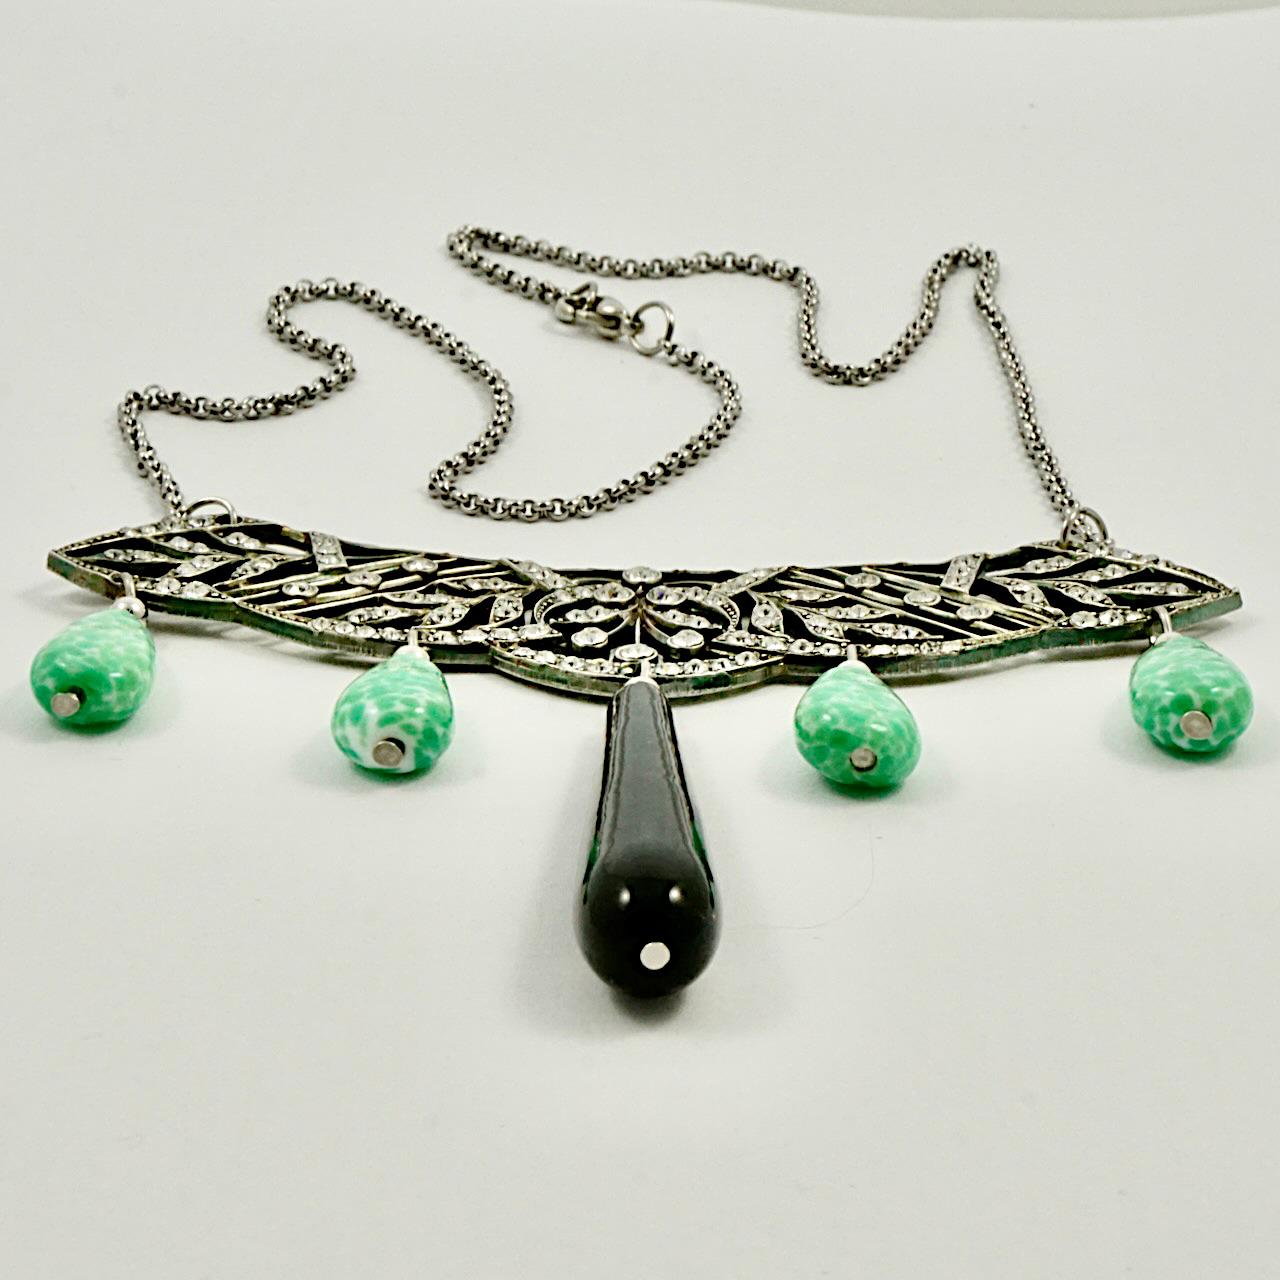 Reworked Tiara Crystal Necklace with Peking Black Glass Drops circa 1930s  For Sale 3